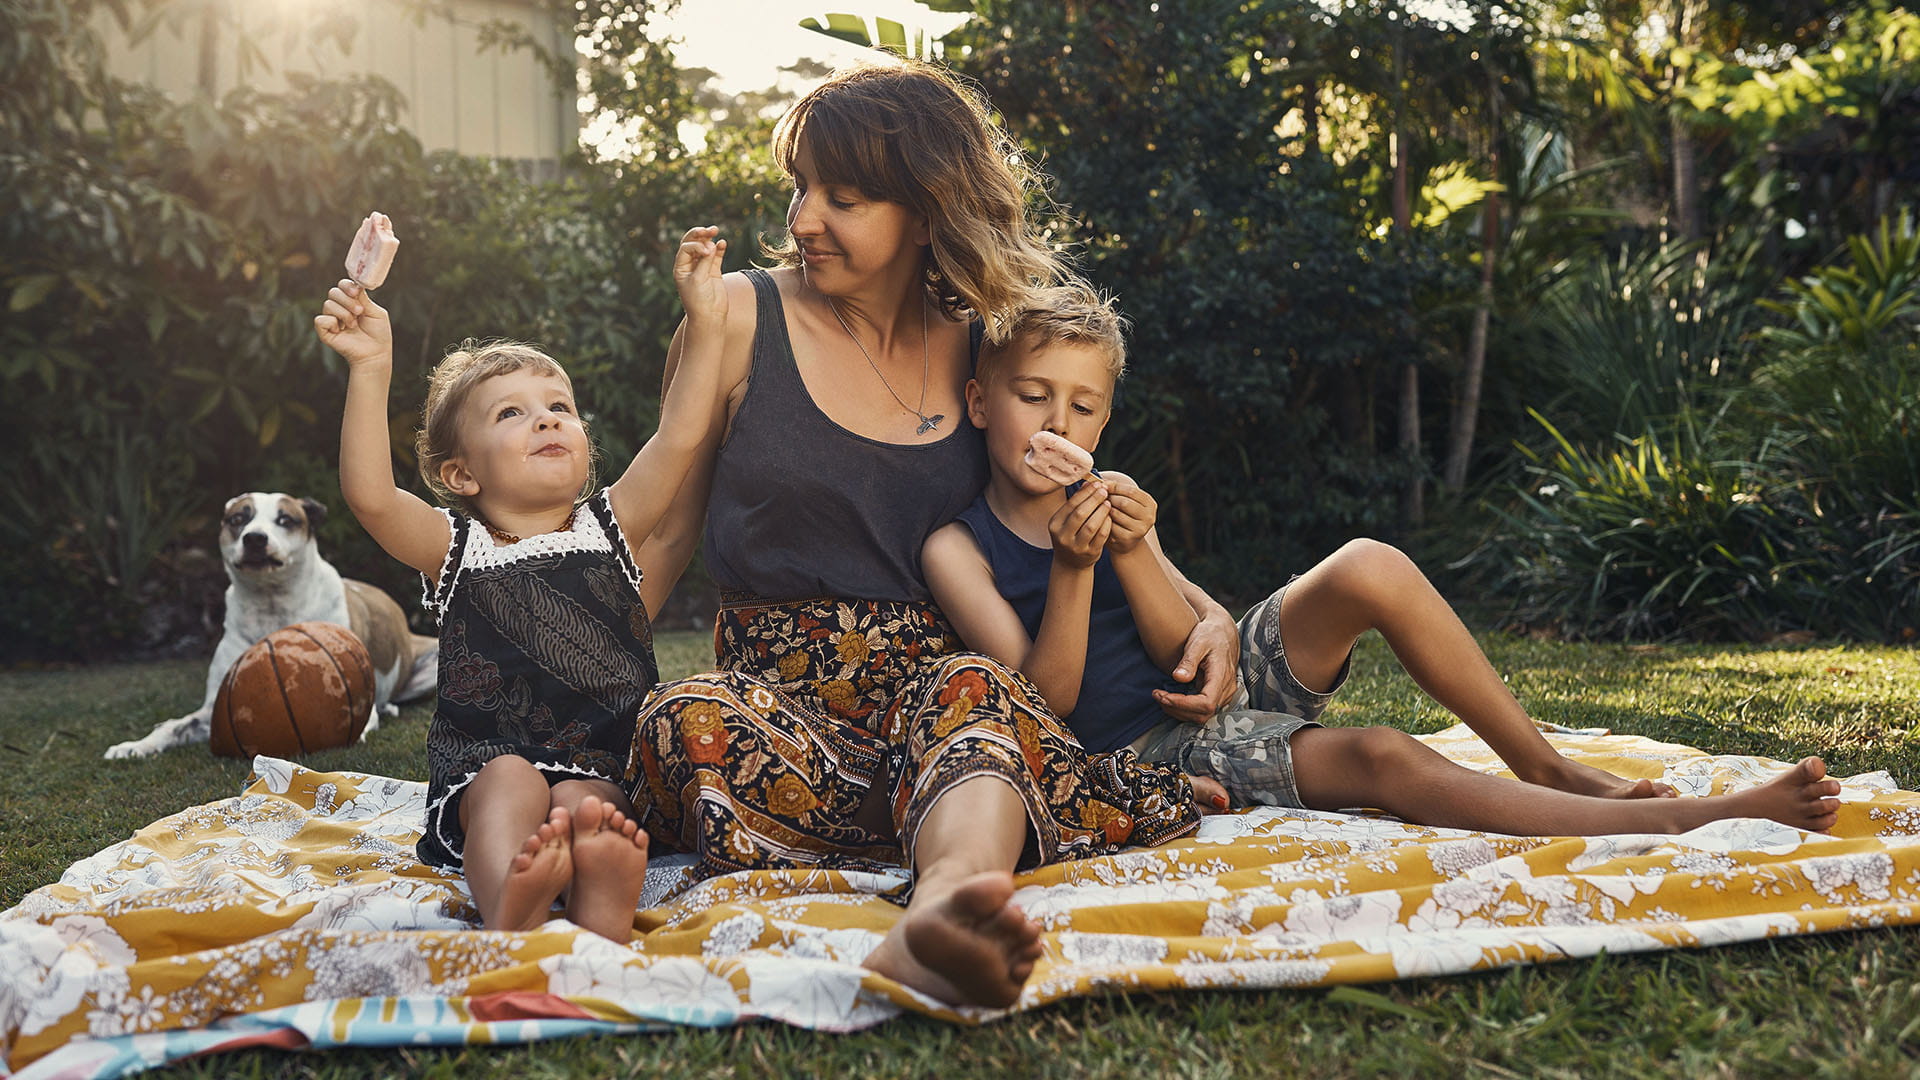 A woman shares a blanket with two children in a sunny backyward while they all eat ice-cream. A dog sits in the background.